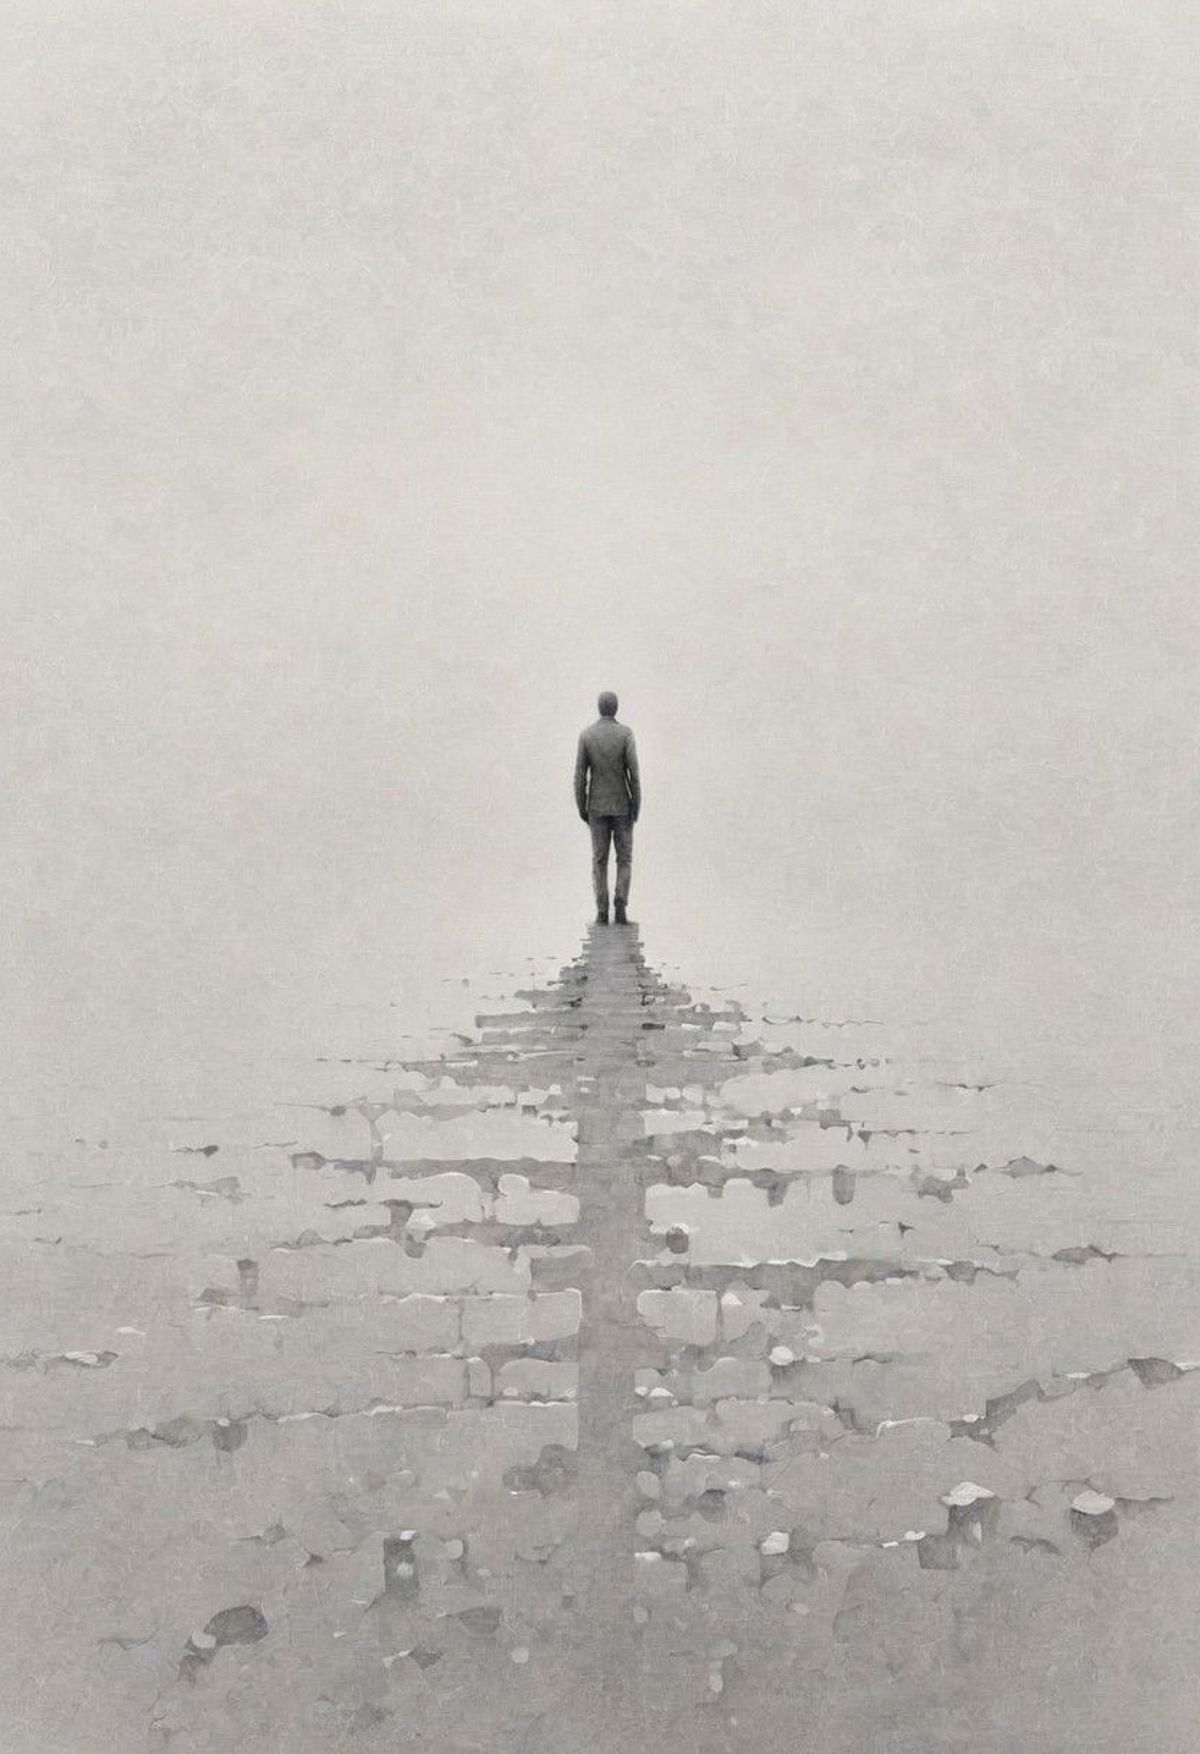 A man walking in a foggy area with a broken road.